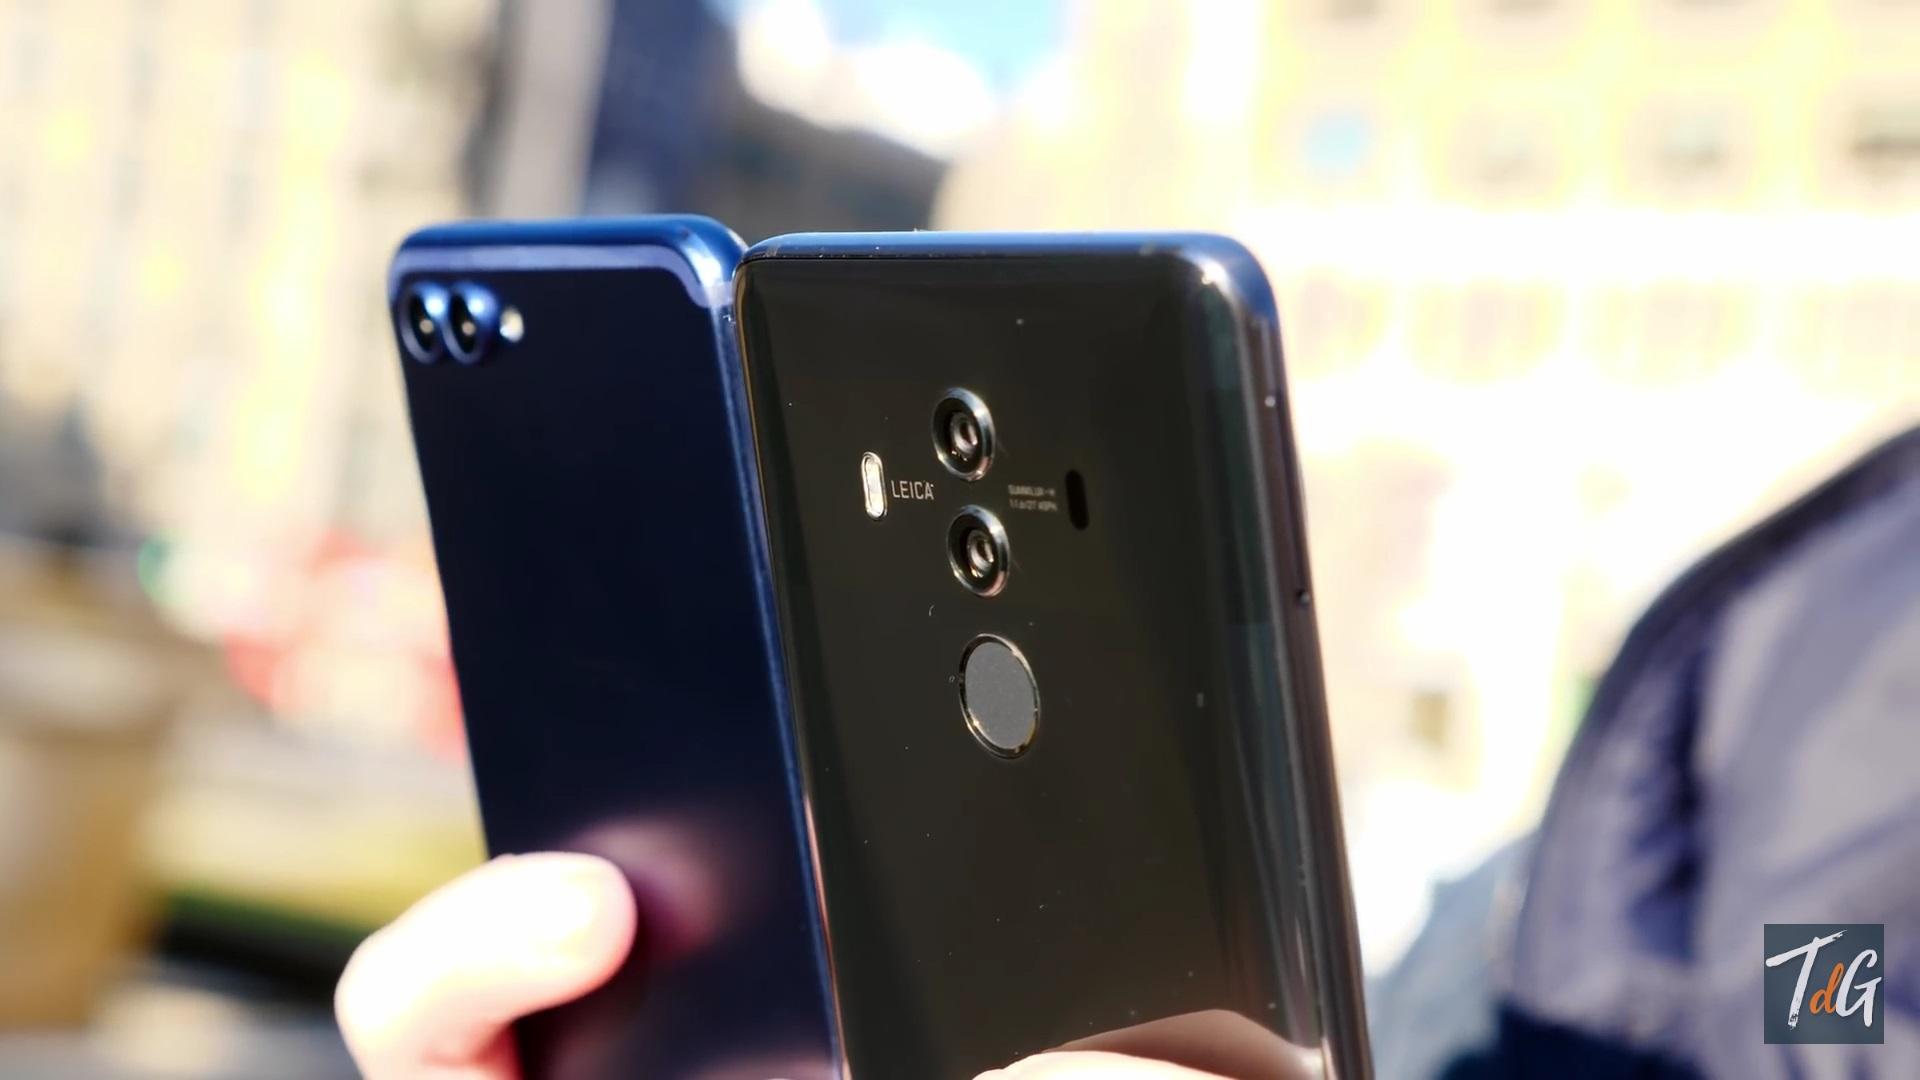 comparativa Huawei Mate 10 Pro y Honor view 10